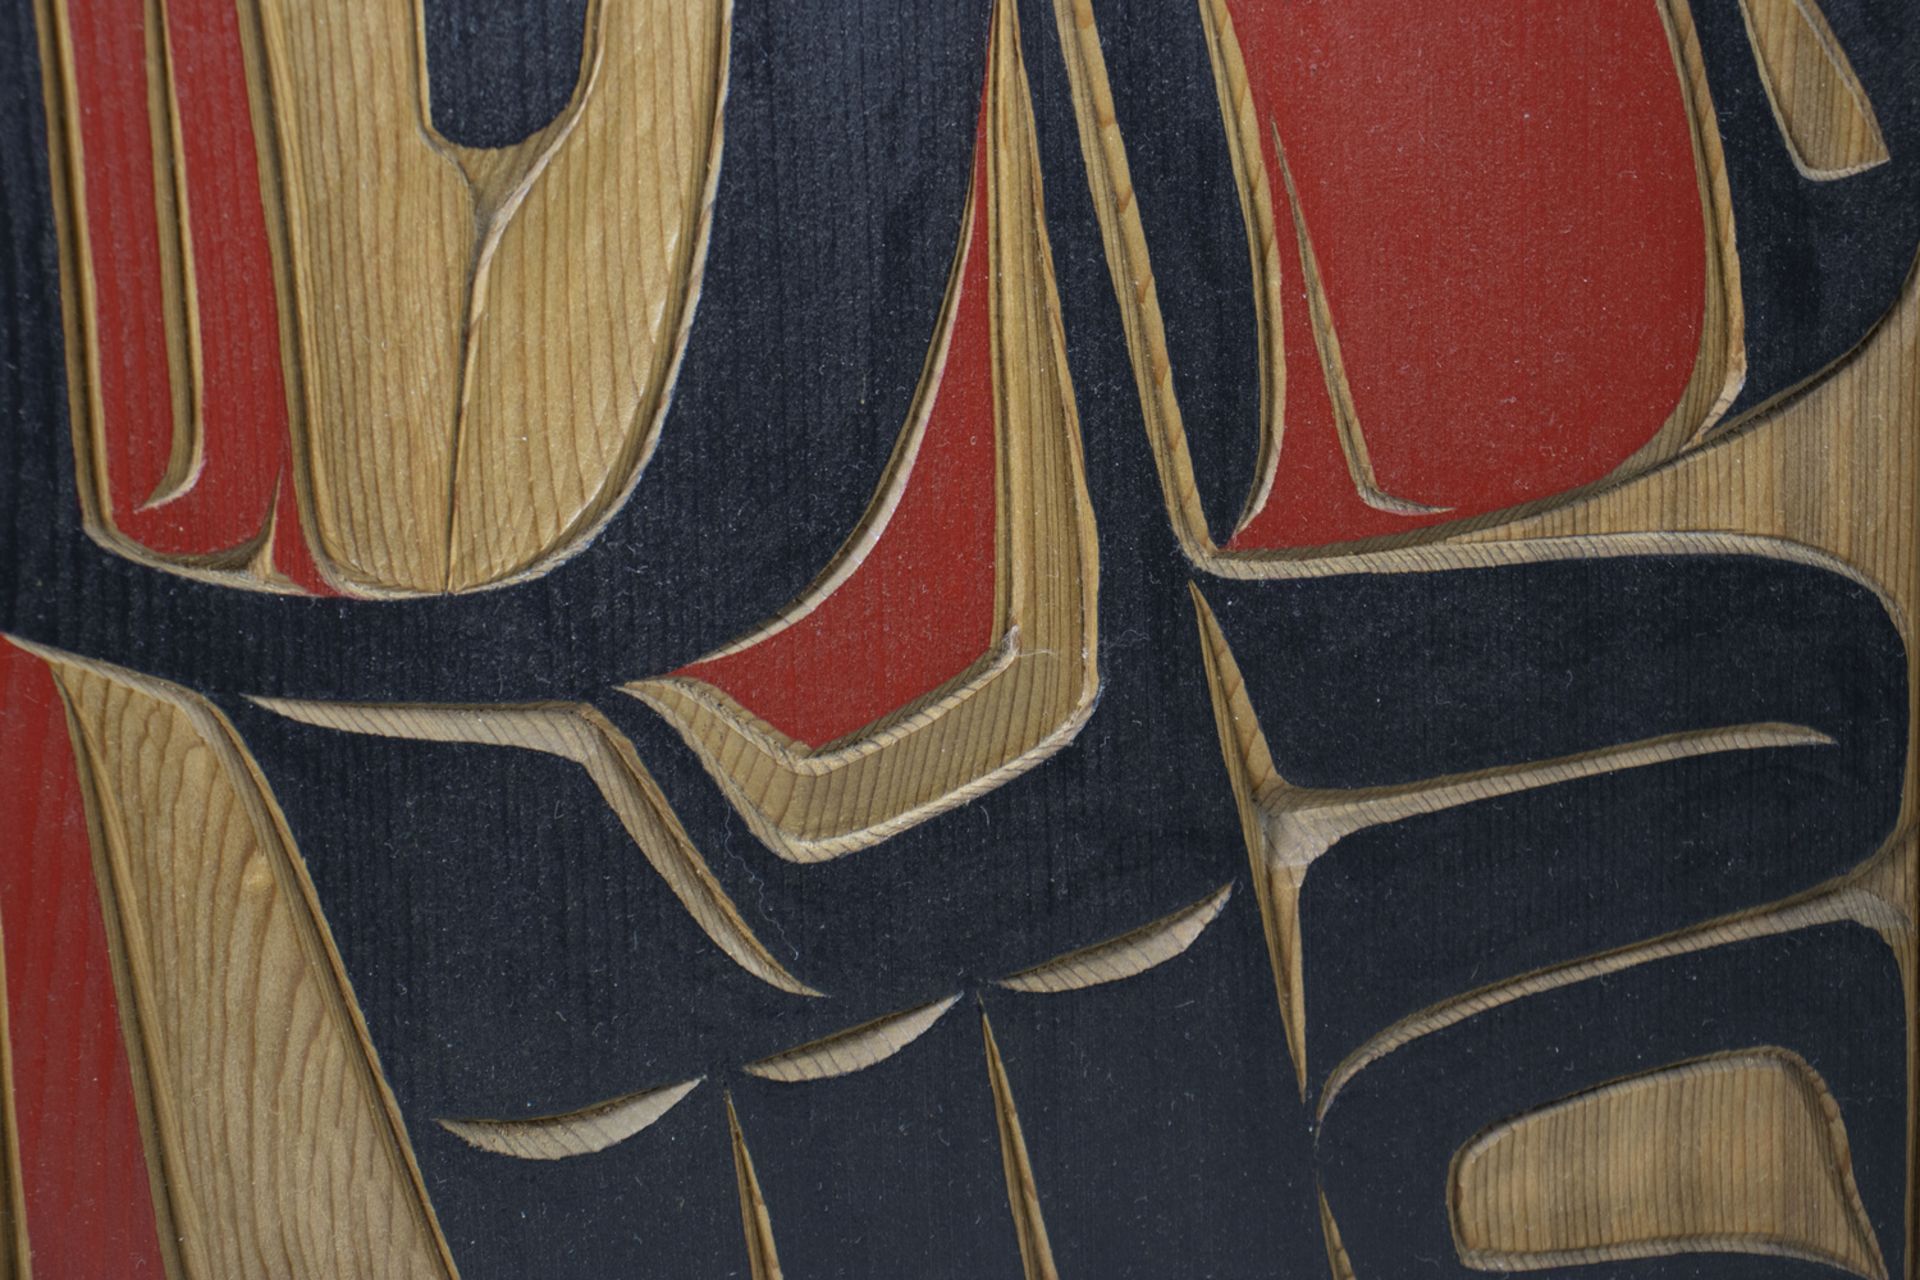 James ADAMS (20. Jh.), Holzrelief 'Rabe' / A wooden relief 'Raven', Canada, 1998 - Image 3 of 5